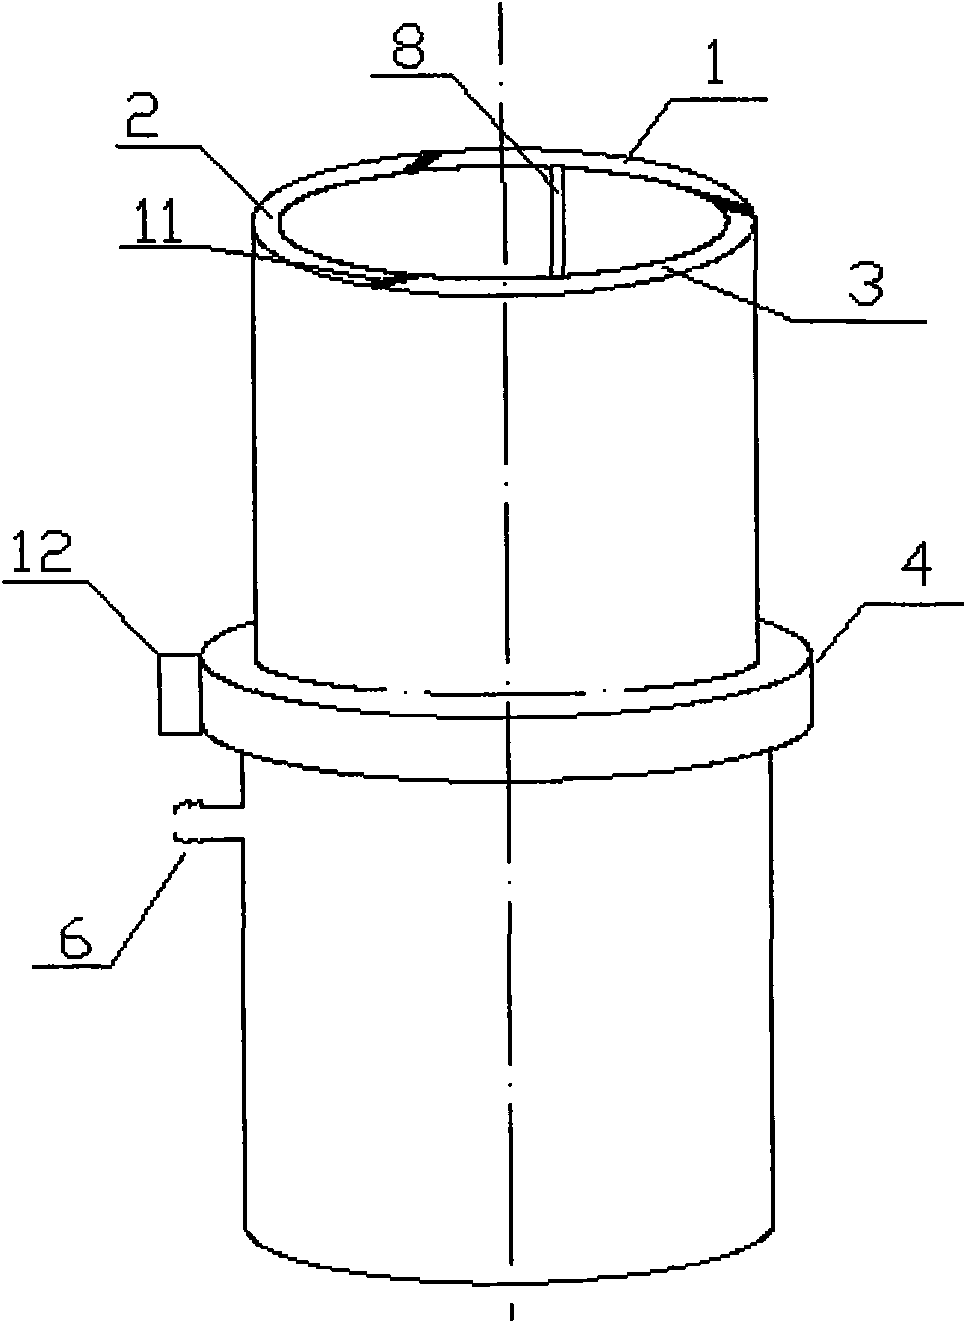 Sample preparation apparatus of sandy clay triaxial test